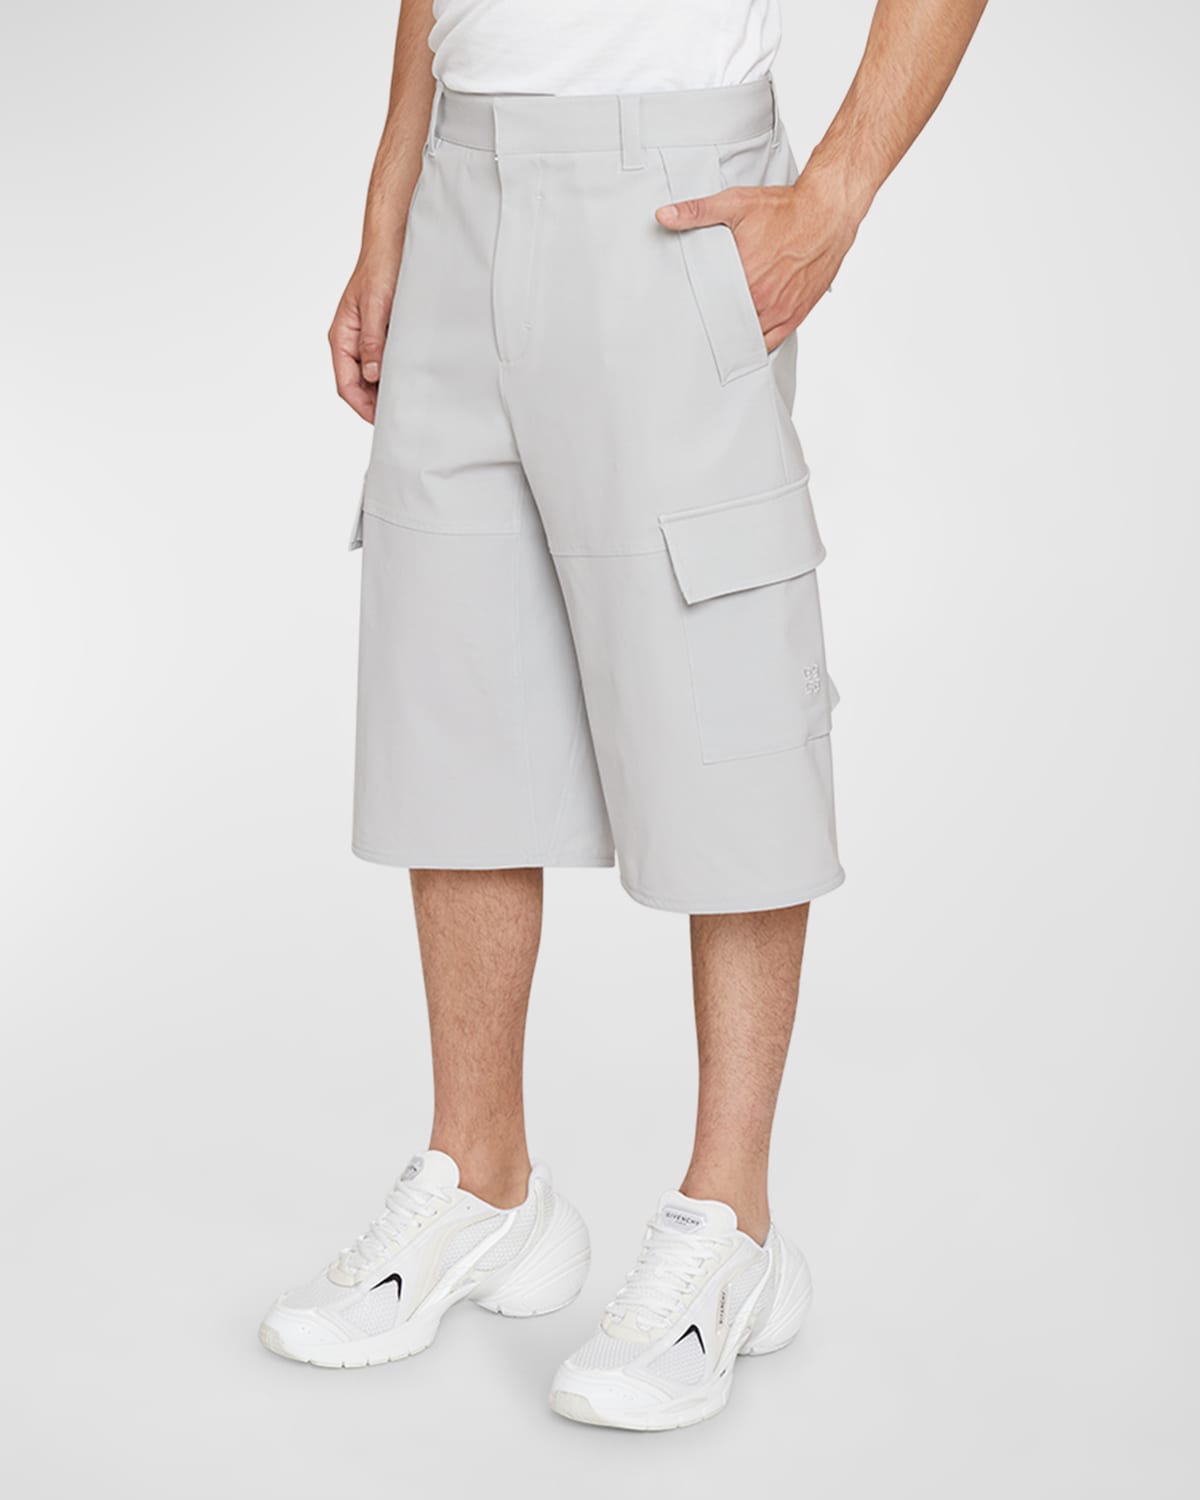 GIVENCHY MEN'S ARCHED WOOL CARGO SHORTS